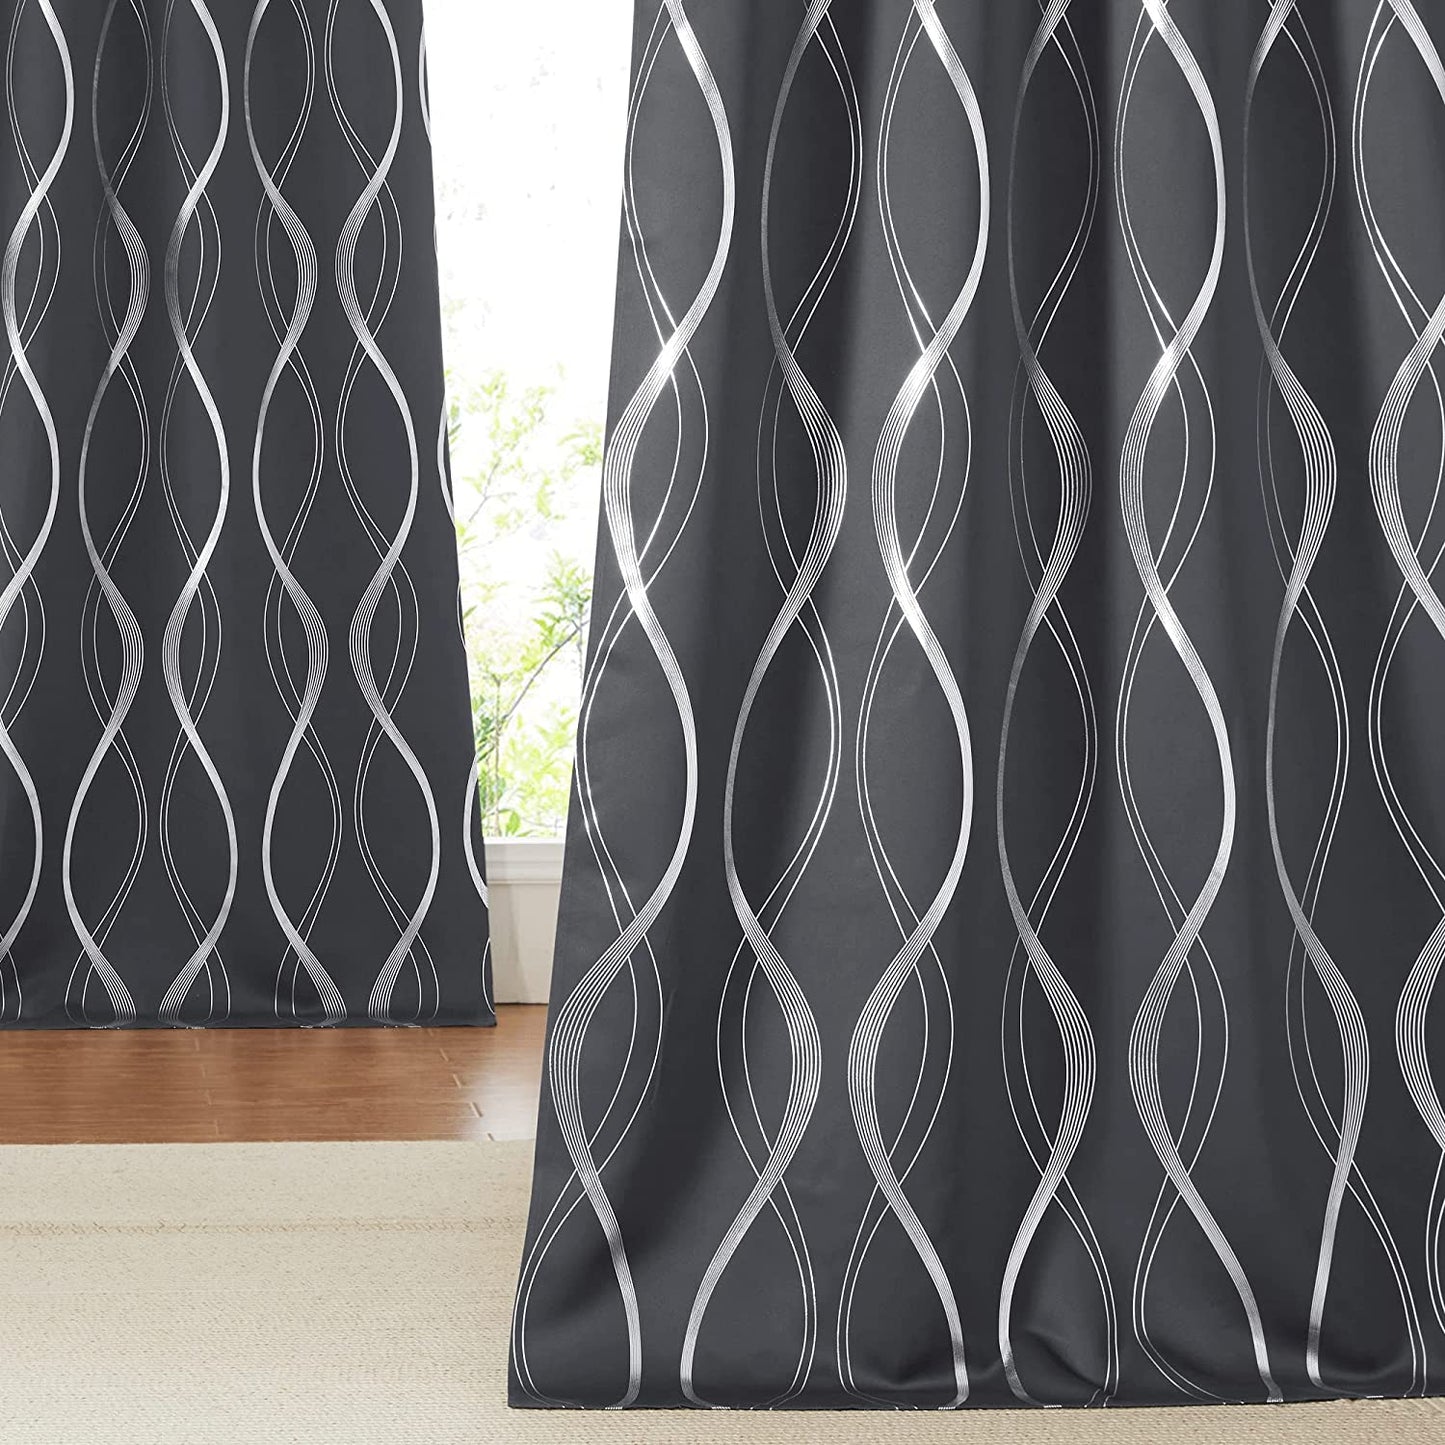 NICETOWN Grey Blackout Curtains 84 Inch Length 2 Panels Set for Bedroom/Living Room, Noise Reducing Thermal Insulated Wave Line Foil Print Drapes for Patio Sliding Glass Door (52 X 84, Gray)  NICETOWN Grey 52"W X 90"L 